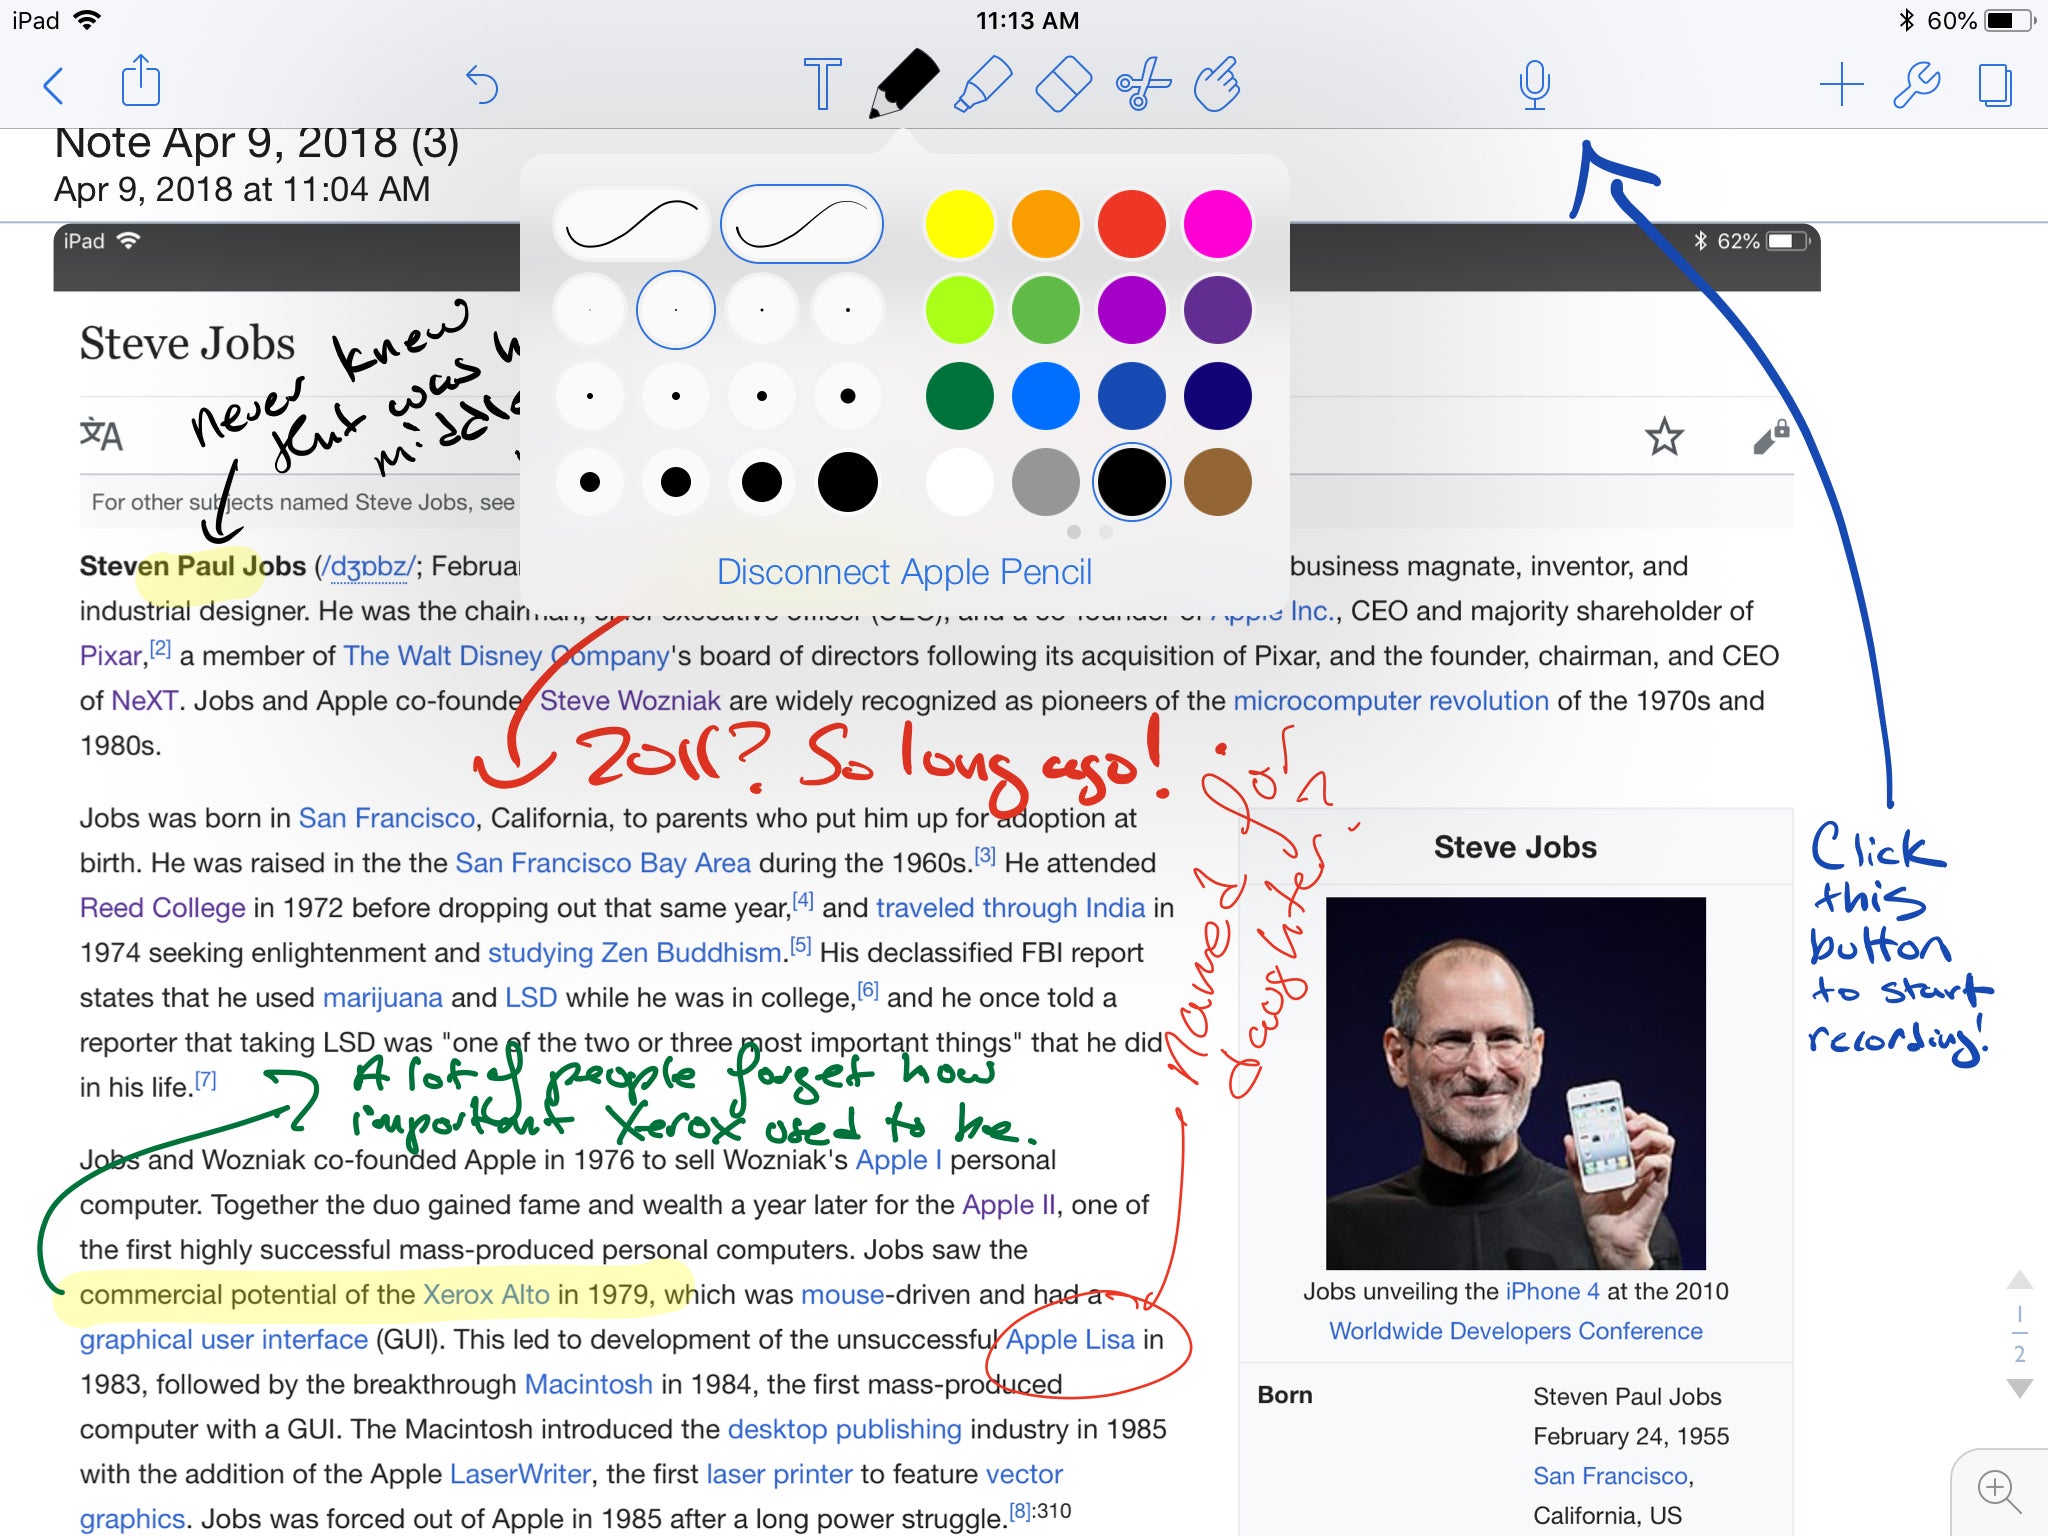 notability notes